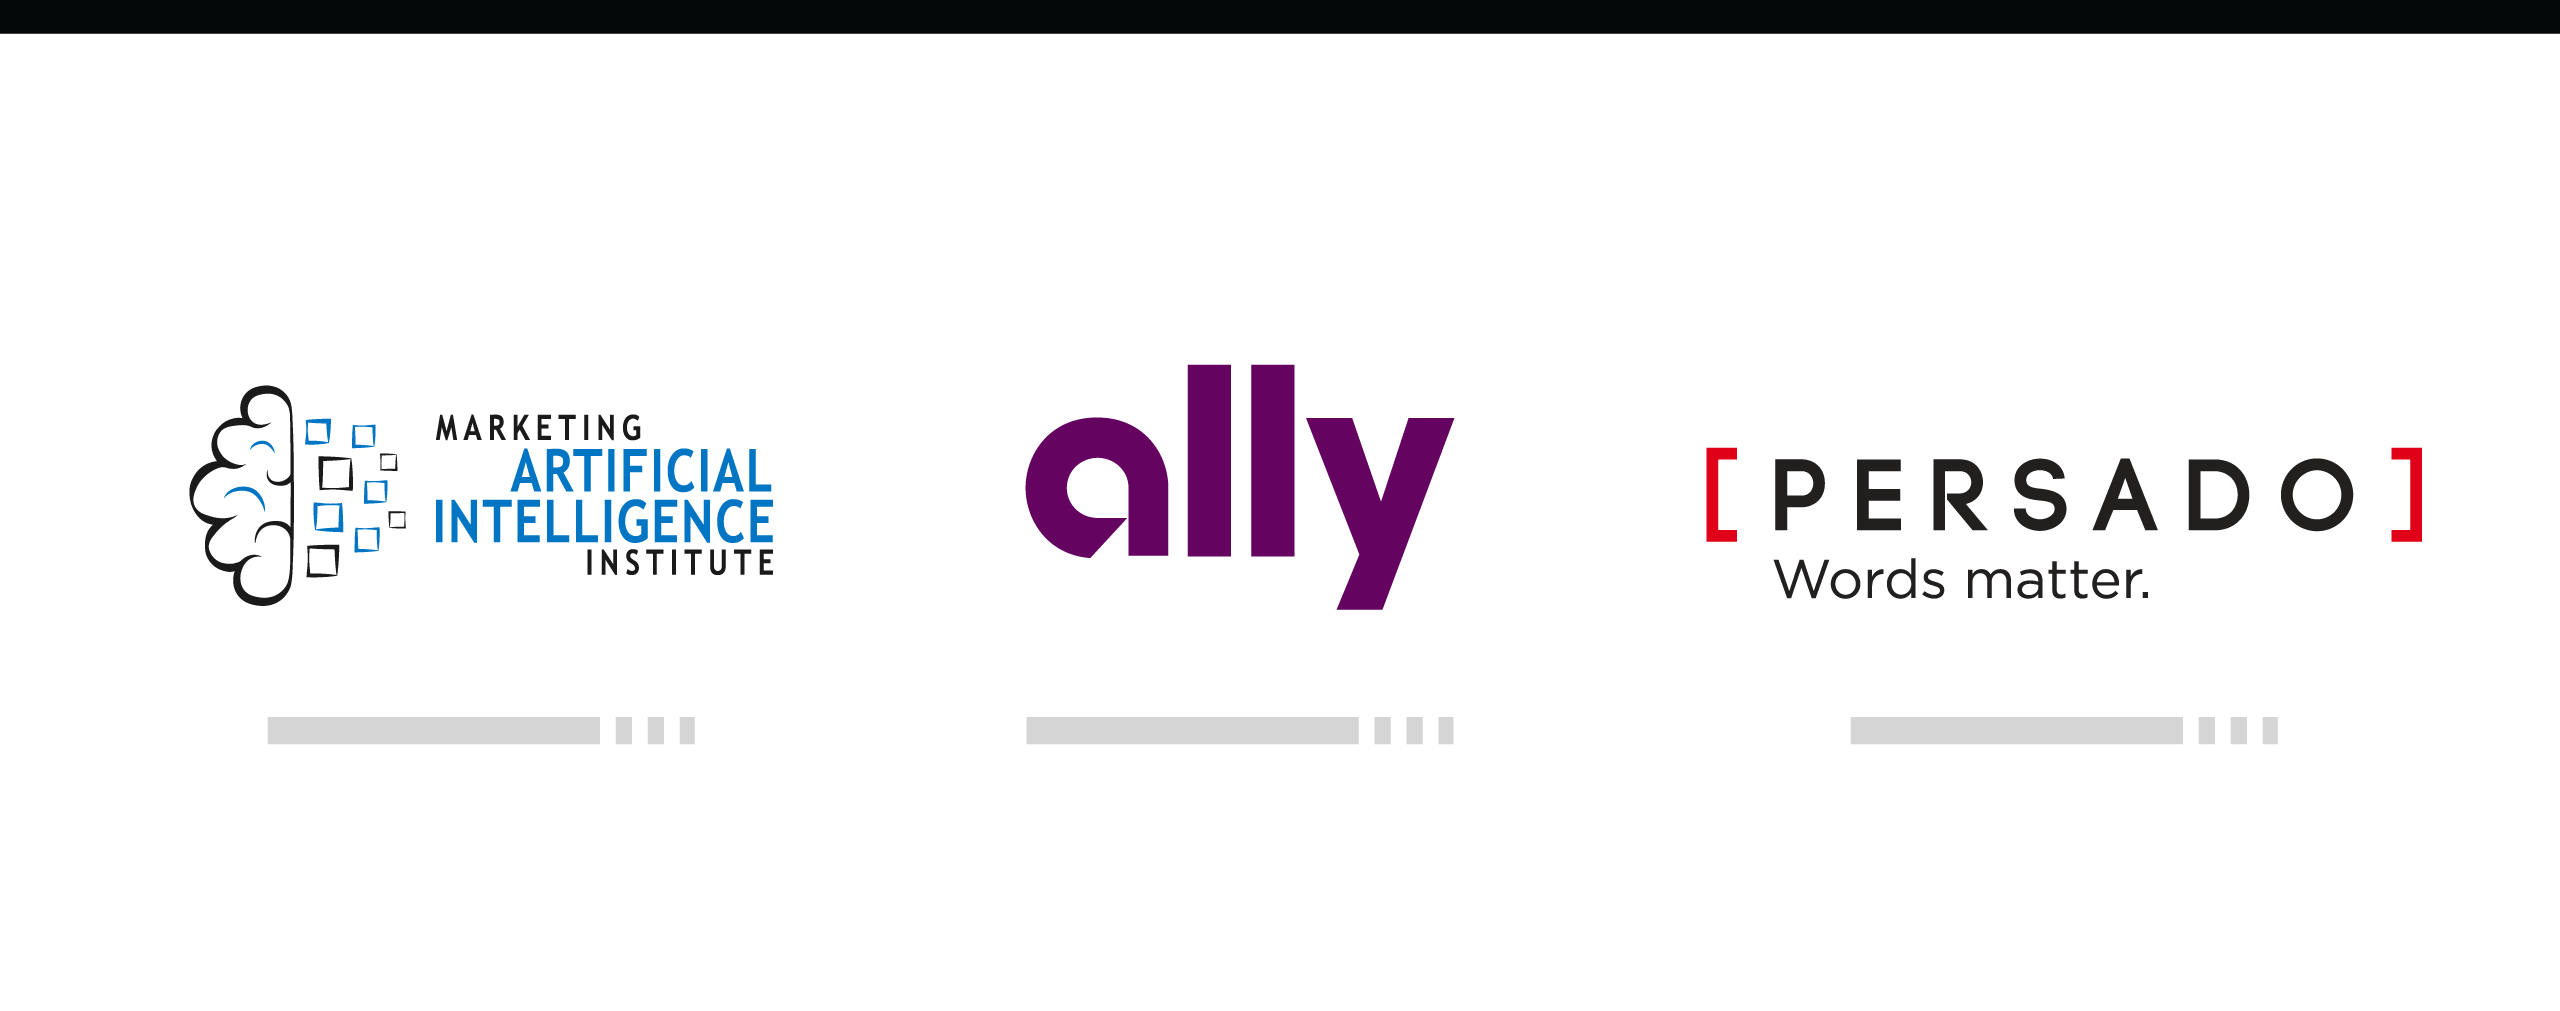 Ally Financial’s CMO Uses AI to Further Innovation